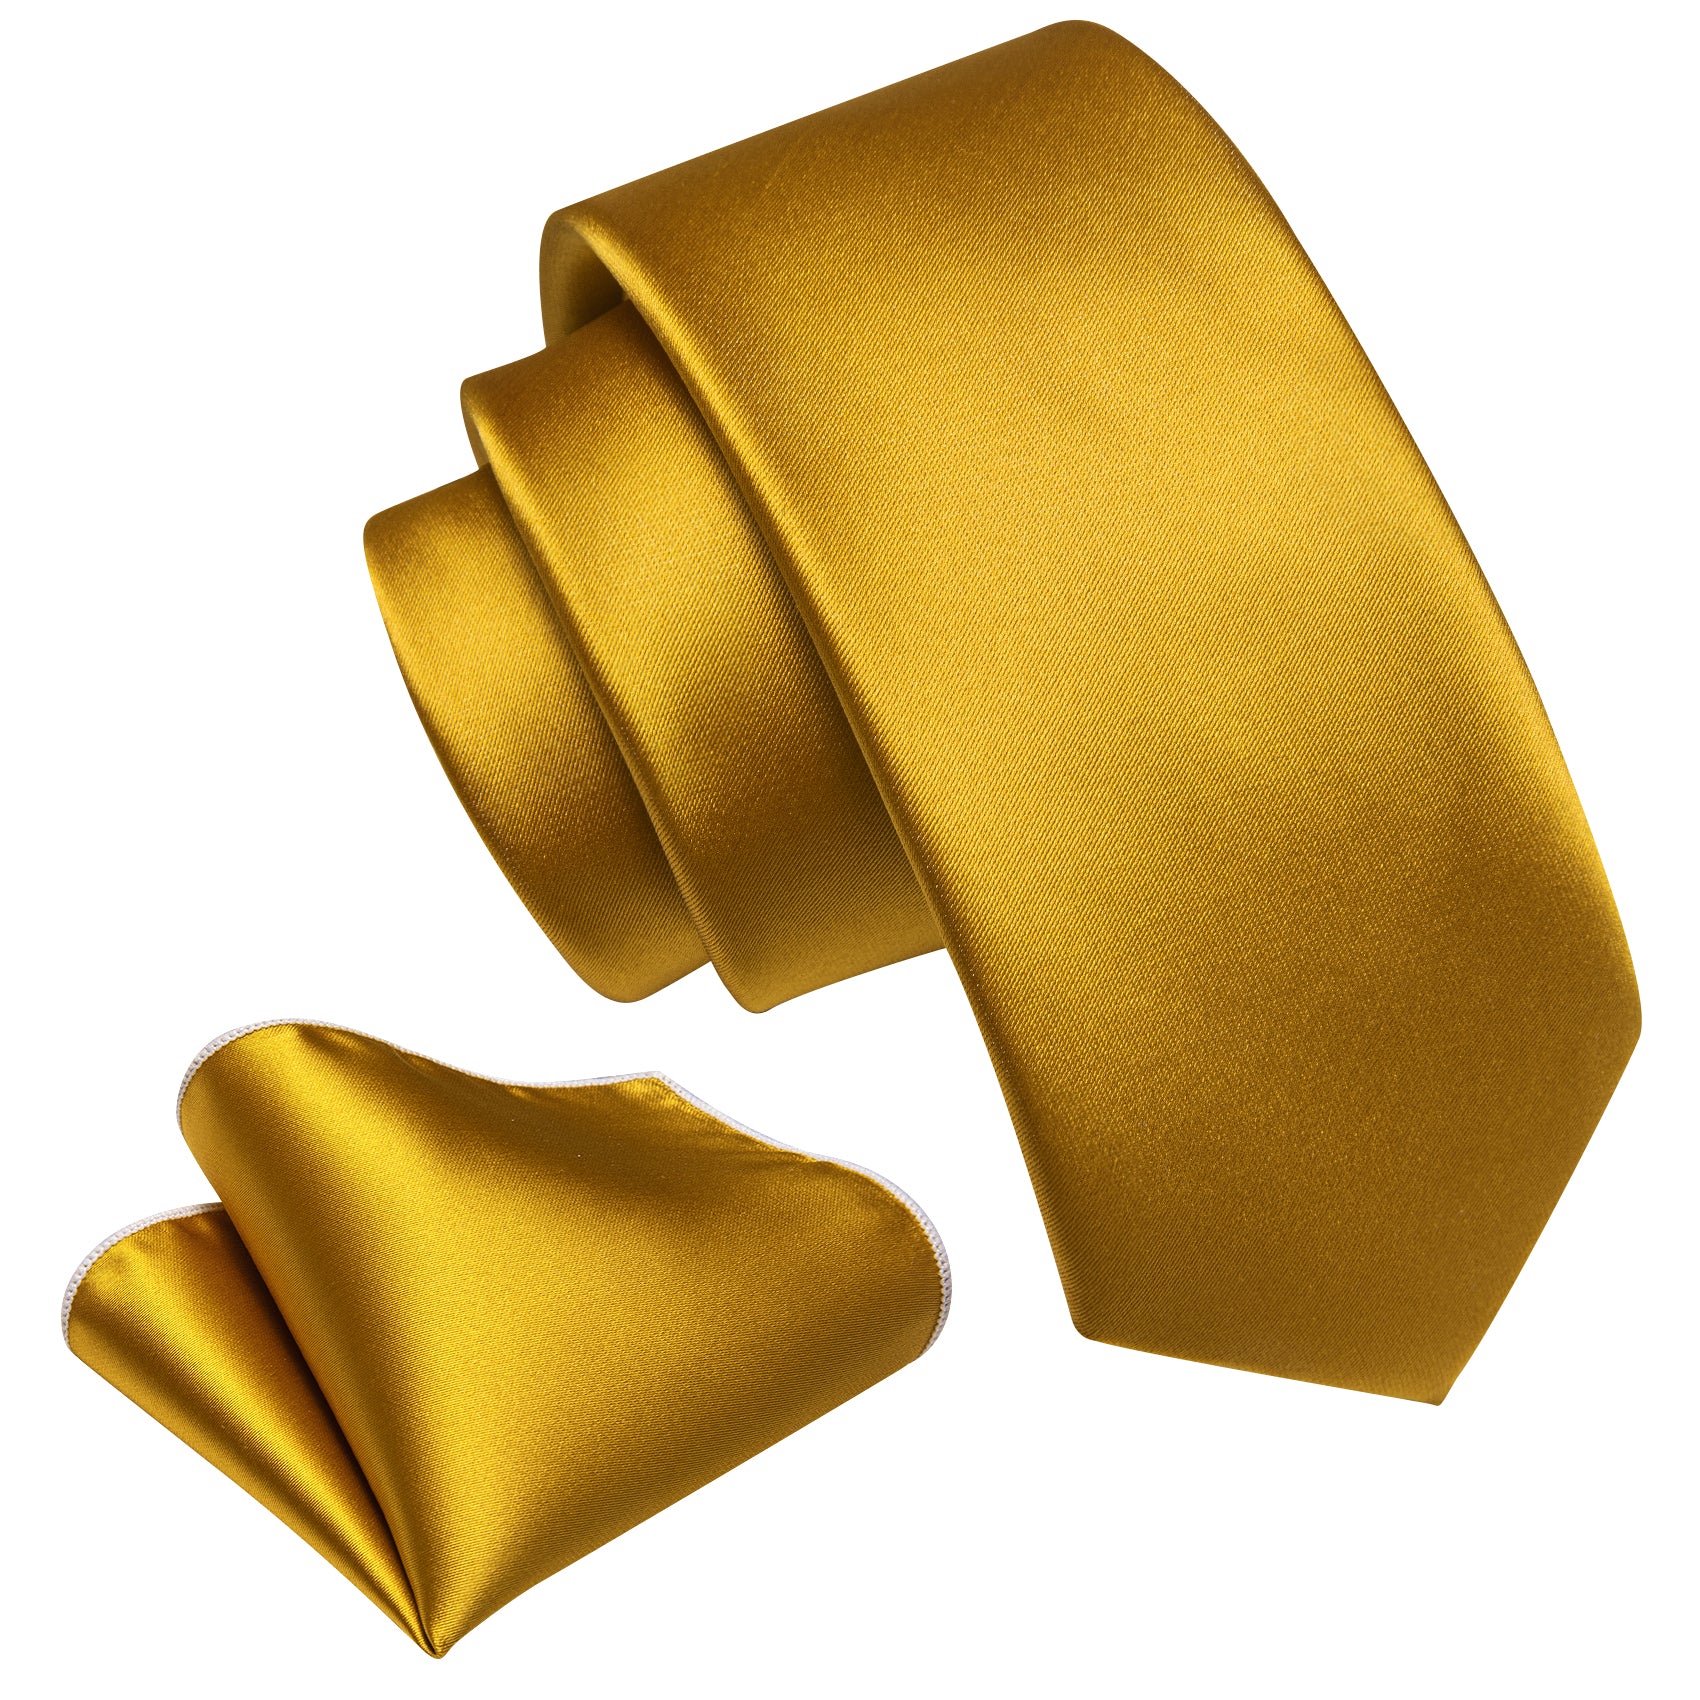 Gold Yellow Solid Tie Pocket Square Set For Kids